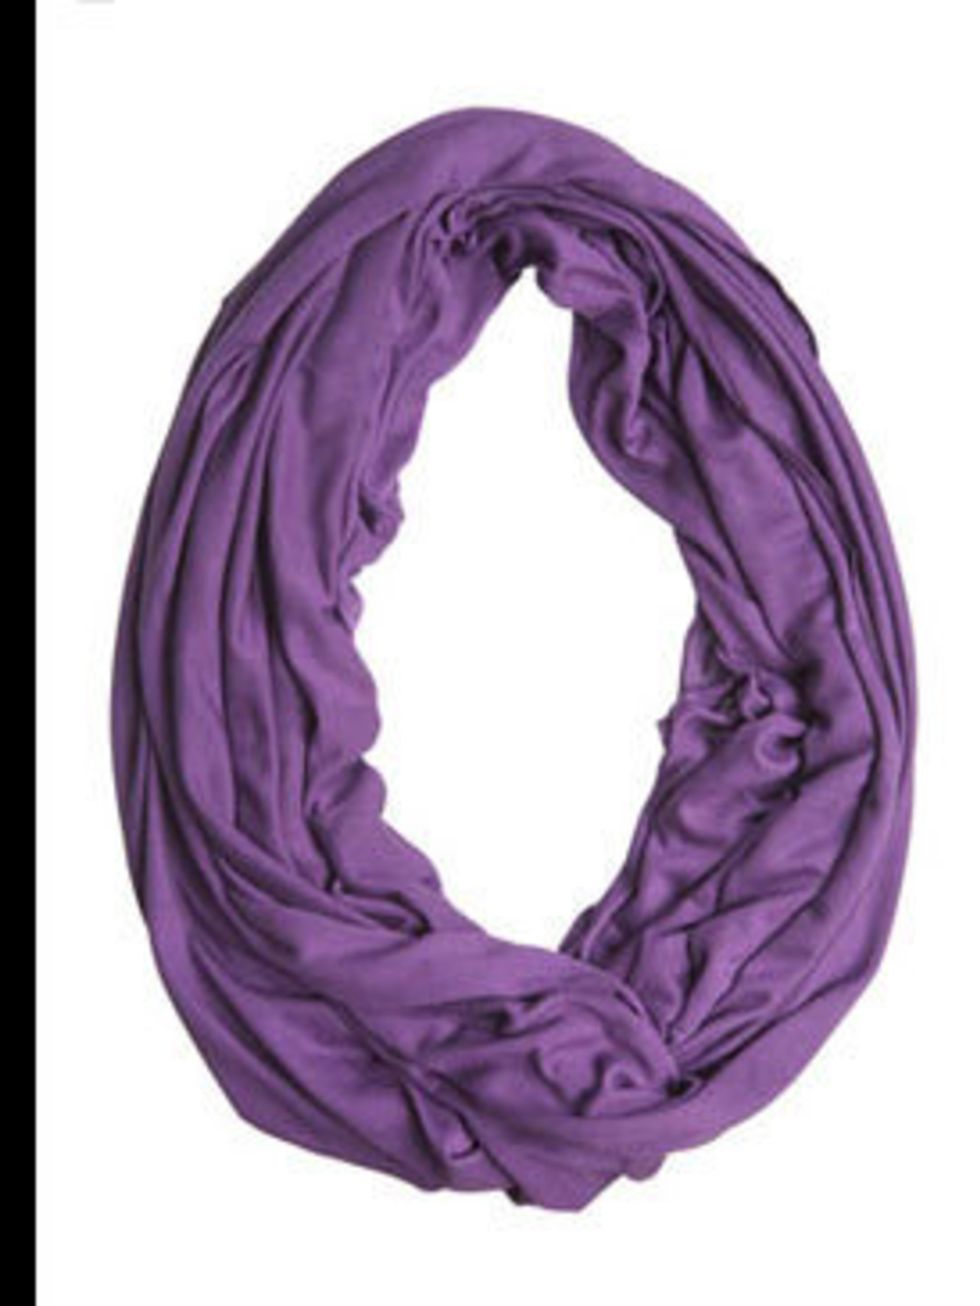 <p>Snood, £16 by <a href="http://www.warehouse.co.uk/fcp/product/fashion//TUBULAR-JERSEY-SCARF/13111">Warehouse</a></p>